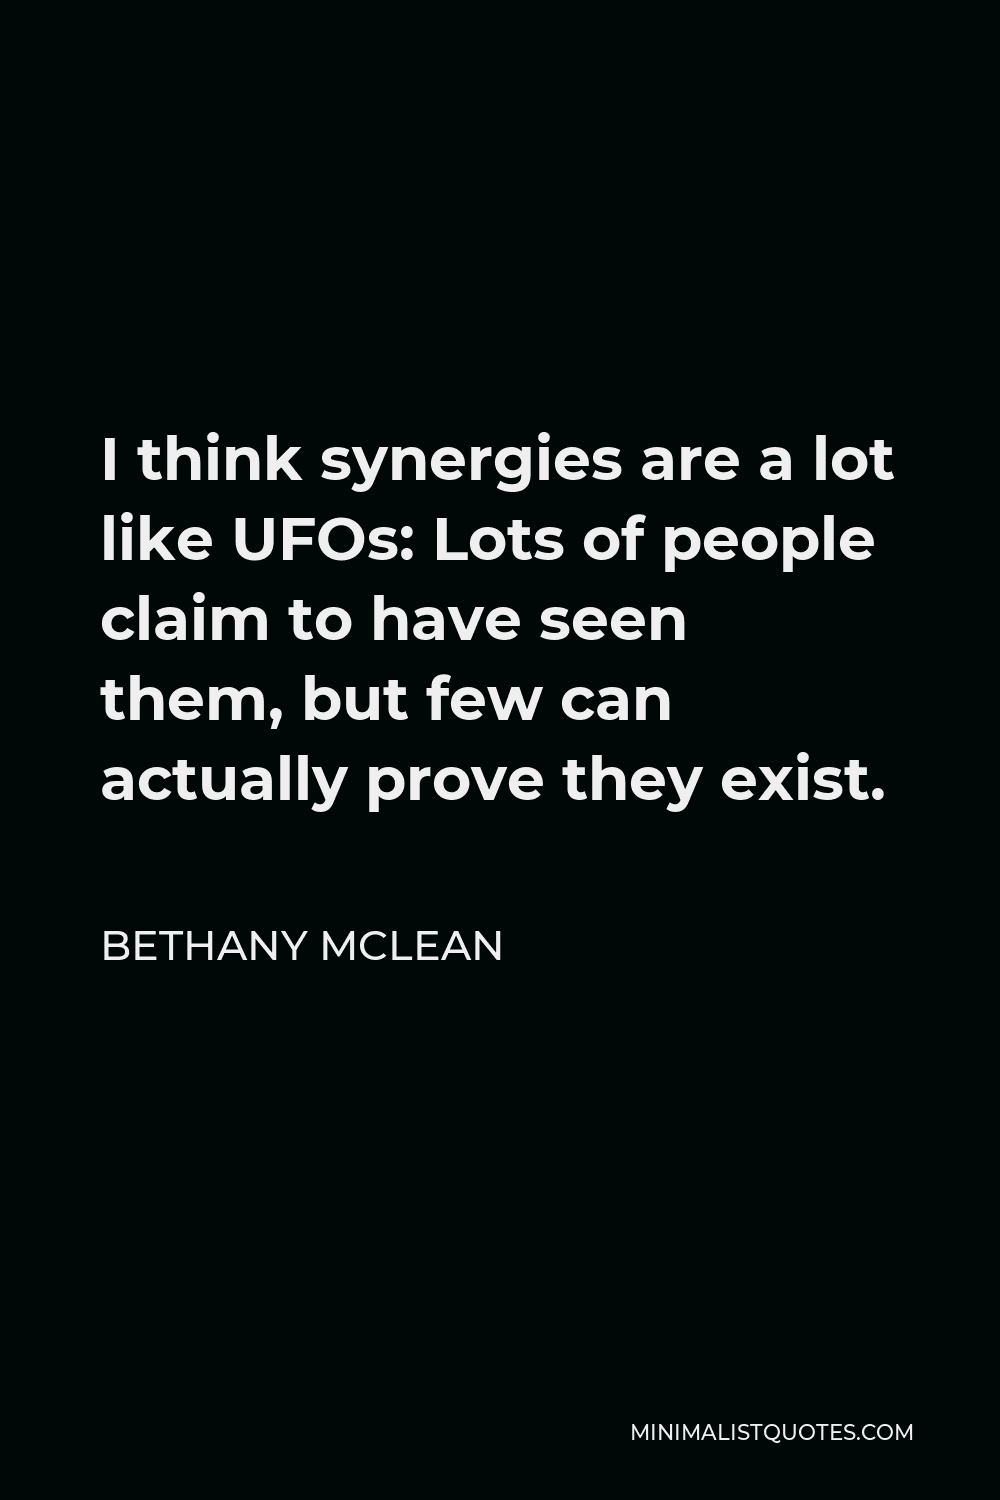 Bethany McLean Quote - I think synergies are a lot like UFOs: Lots of people claim to have seen them, but few can actually prove they exist.